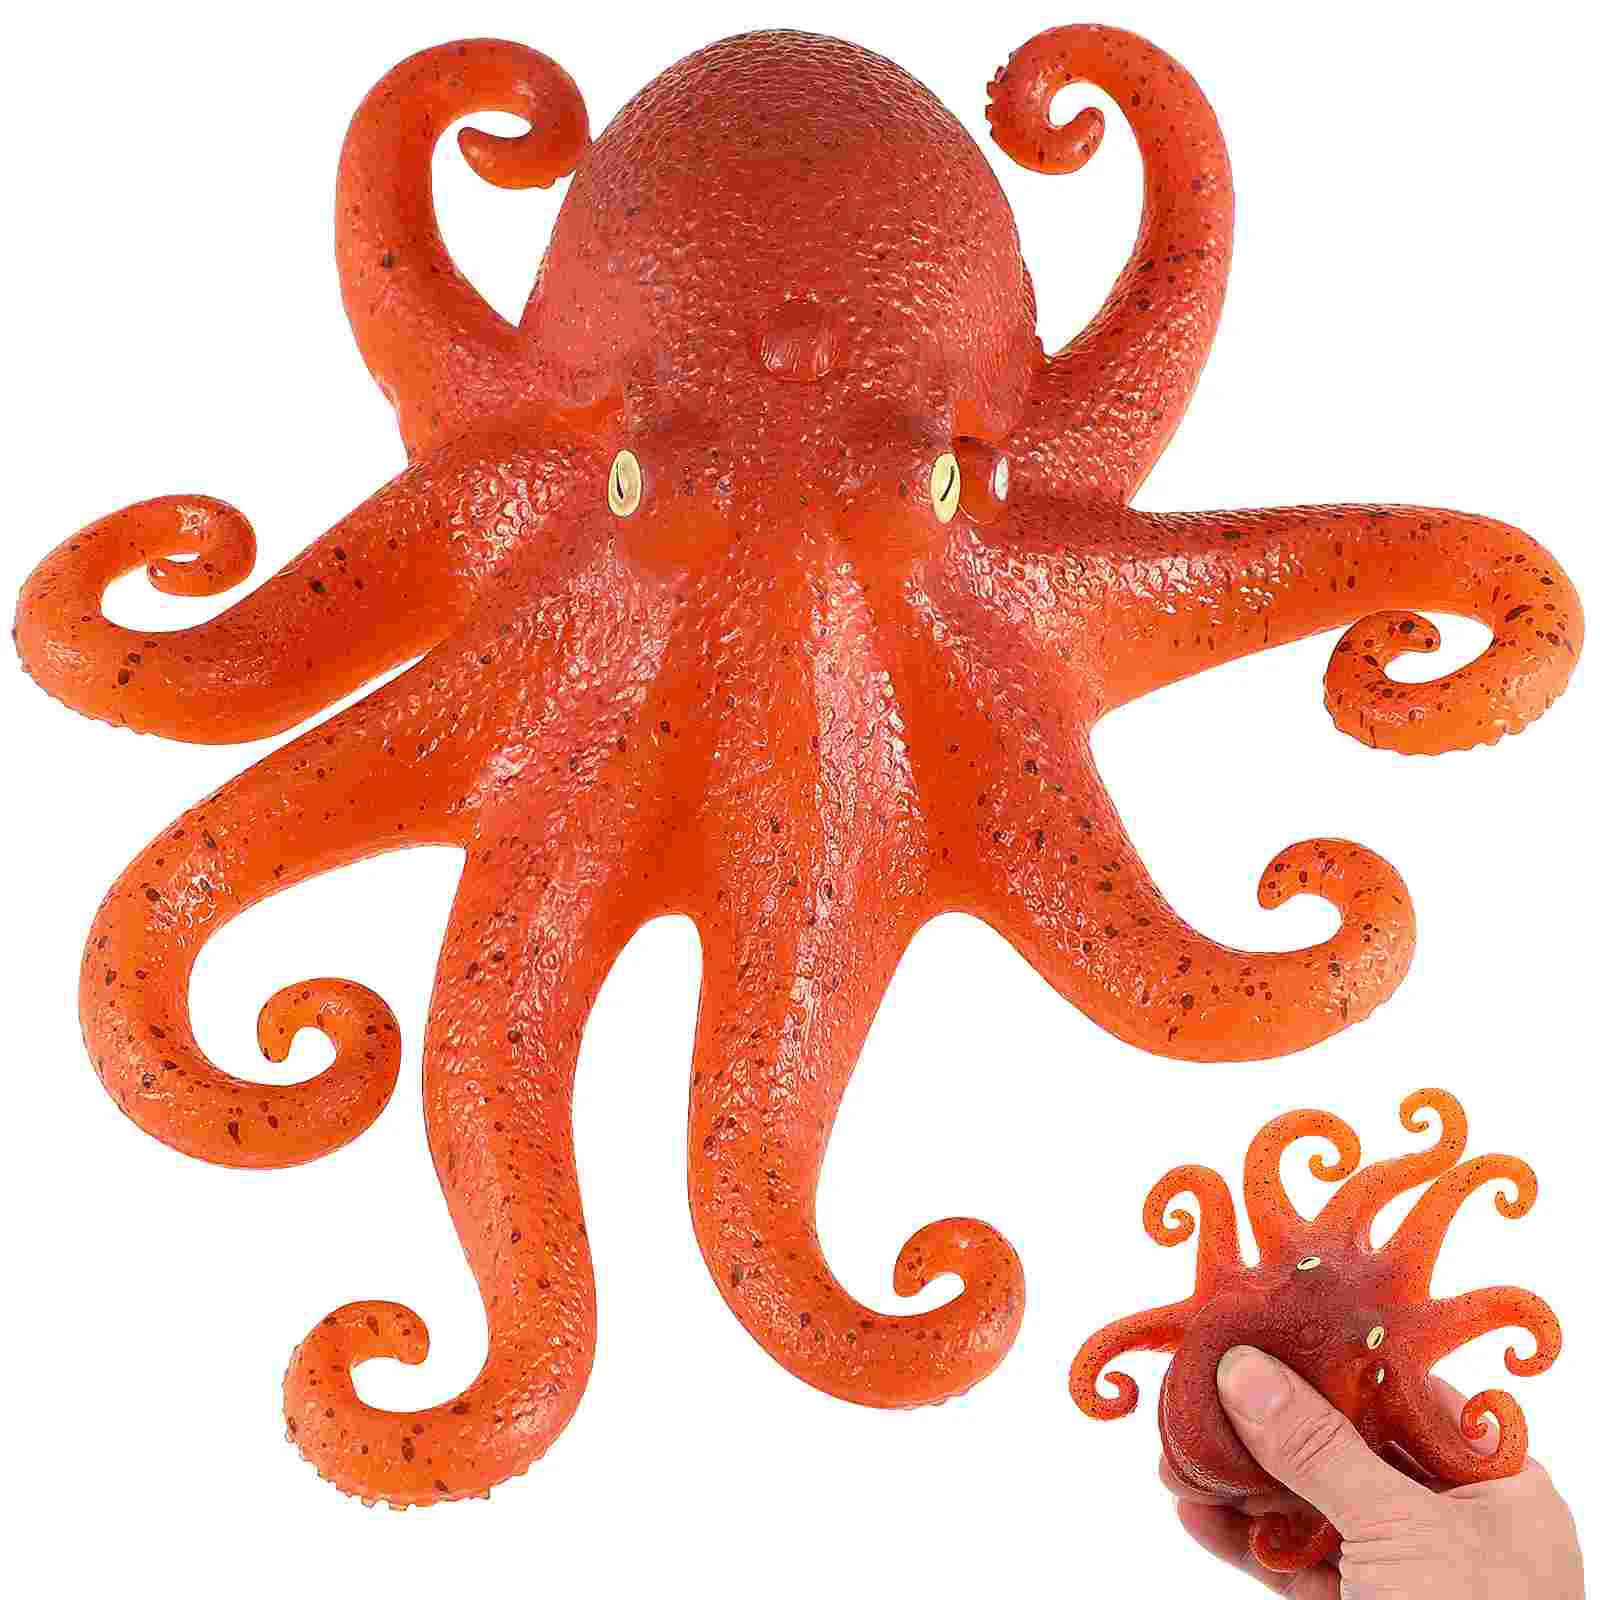 

Cute Octopus Octopus Pinch Toys Octopus Stress Relieve Toy Poppets Kids Octopus Decompression Toys Animals Children Toys